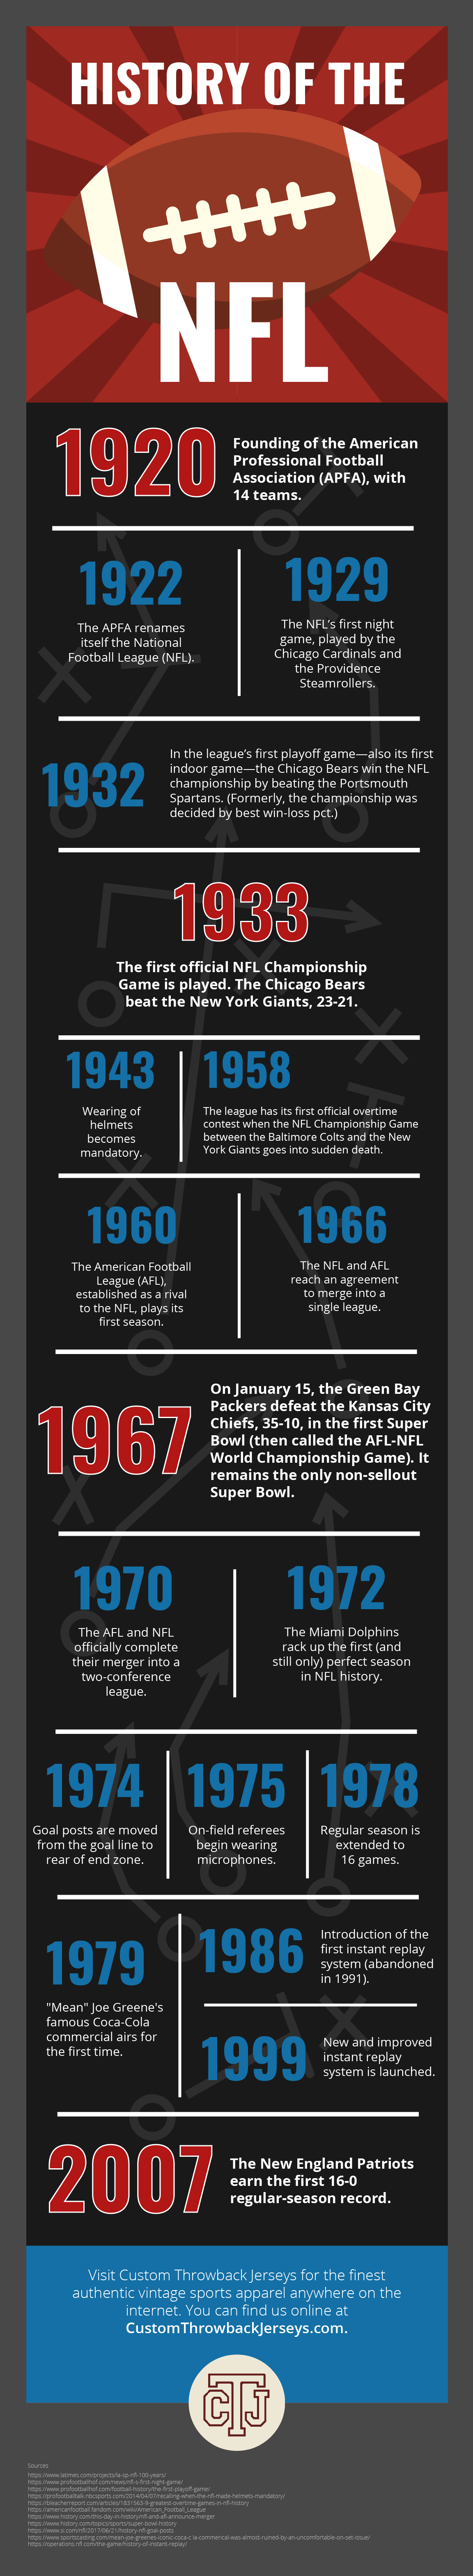 History of the NFL Infographic